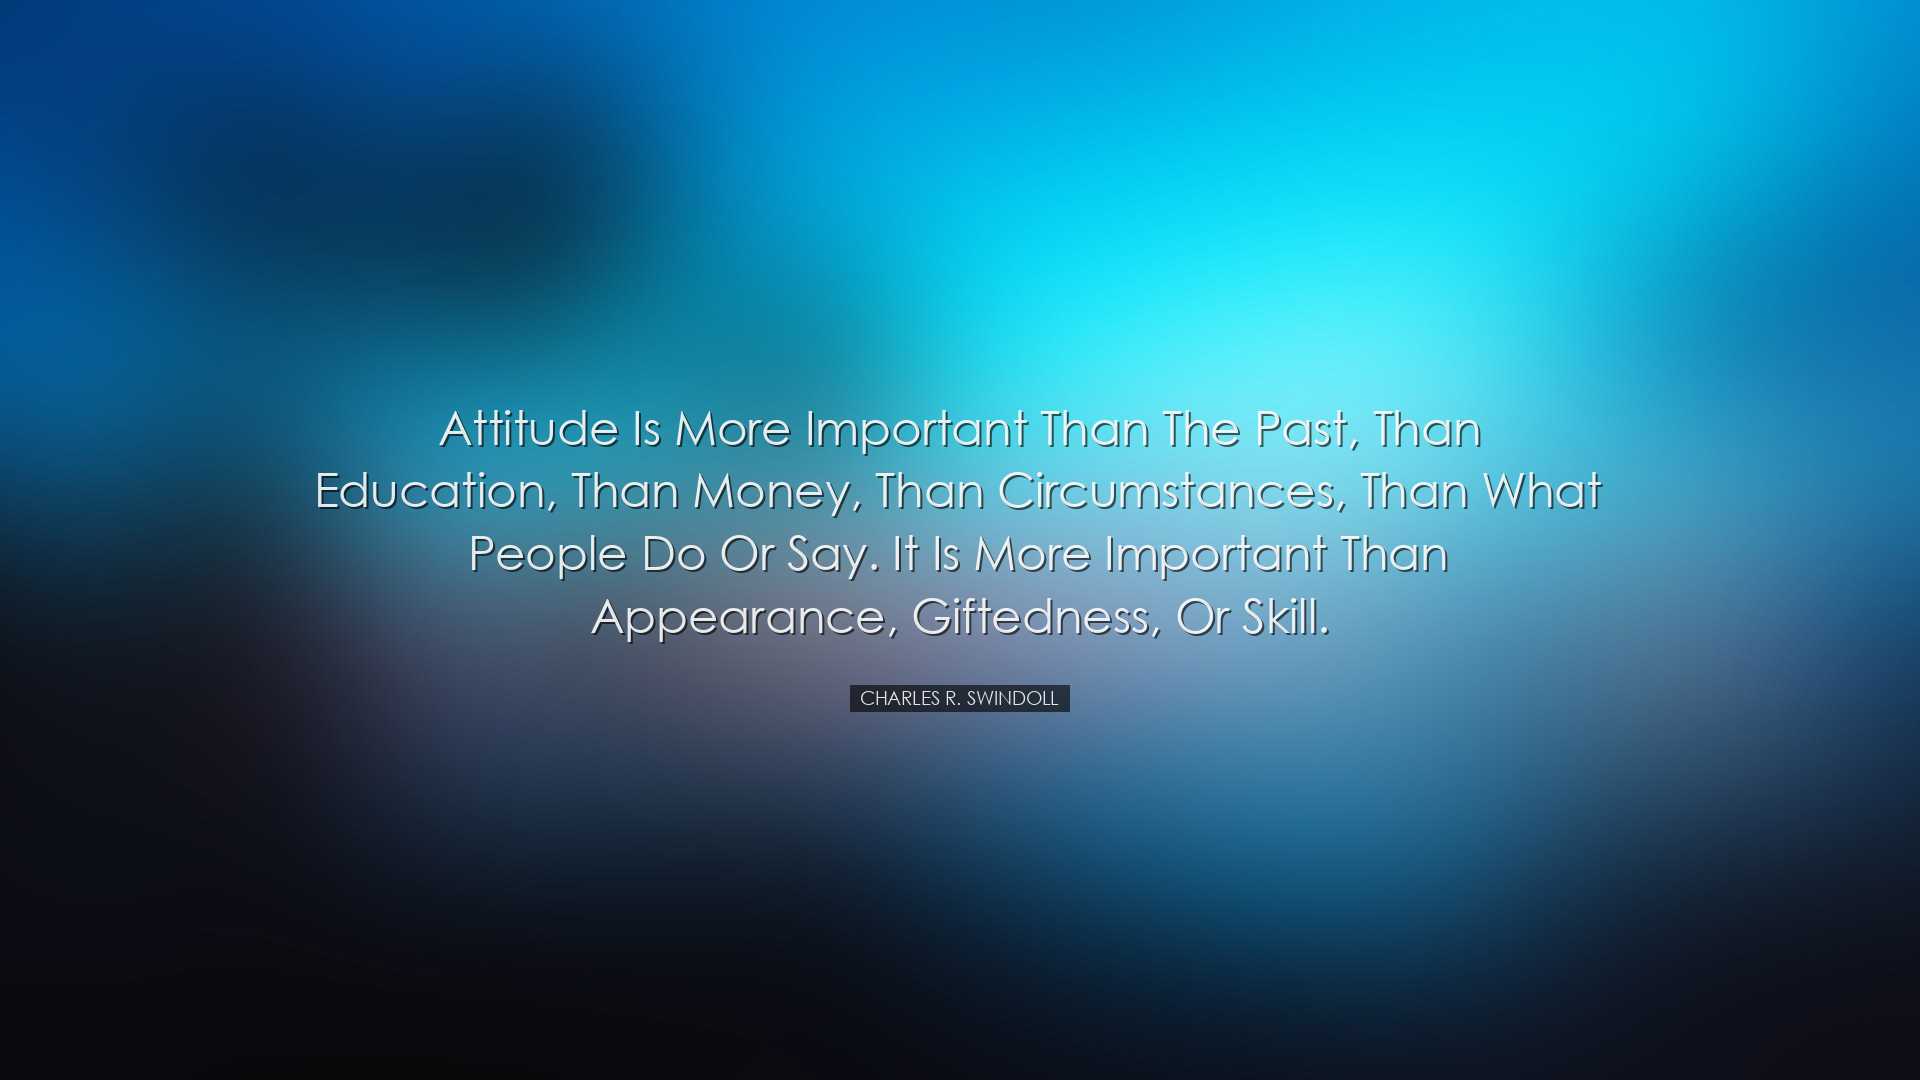 Attitude is more important than the past, than education, than mon